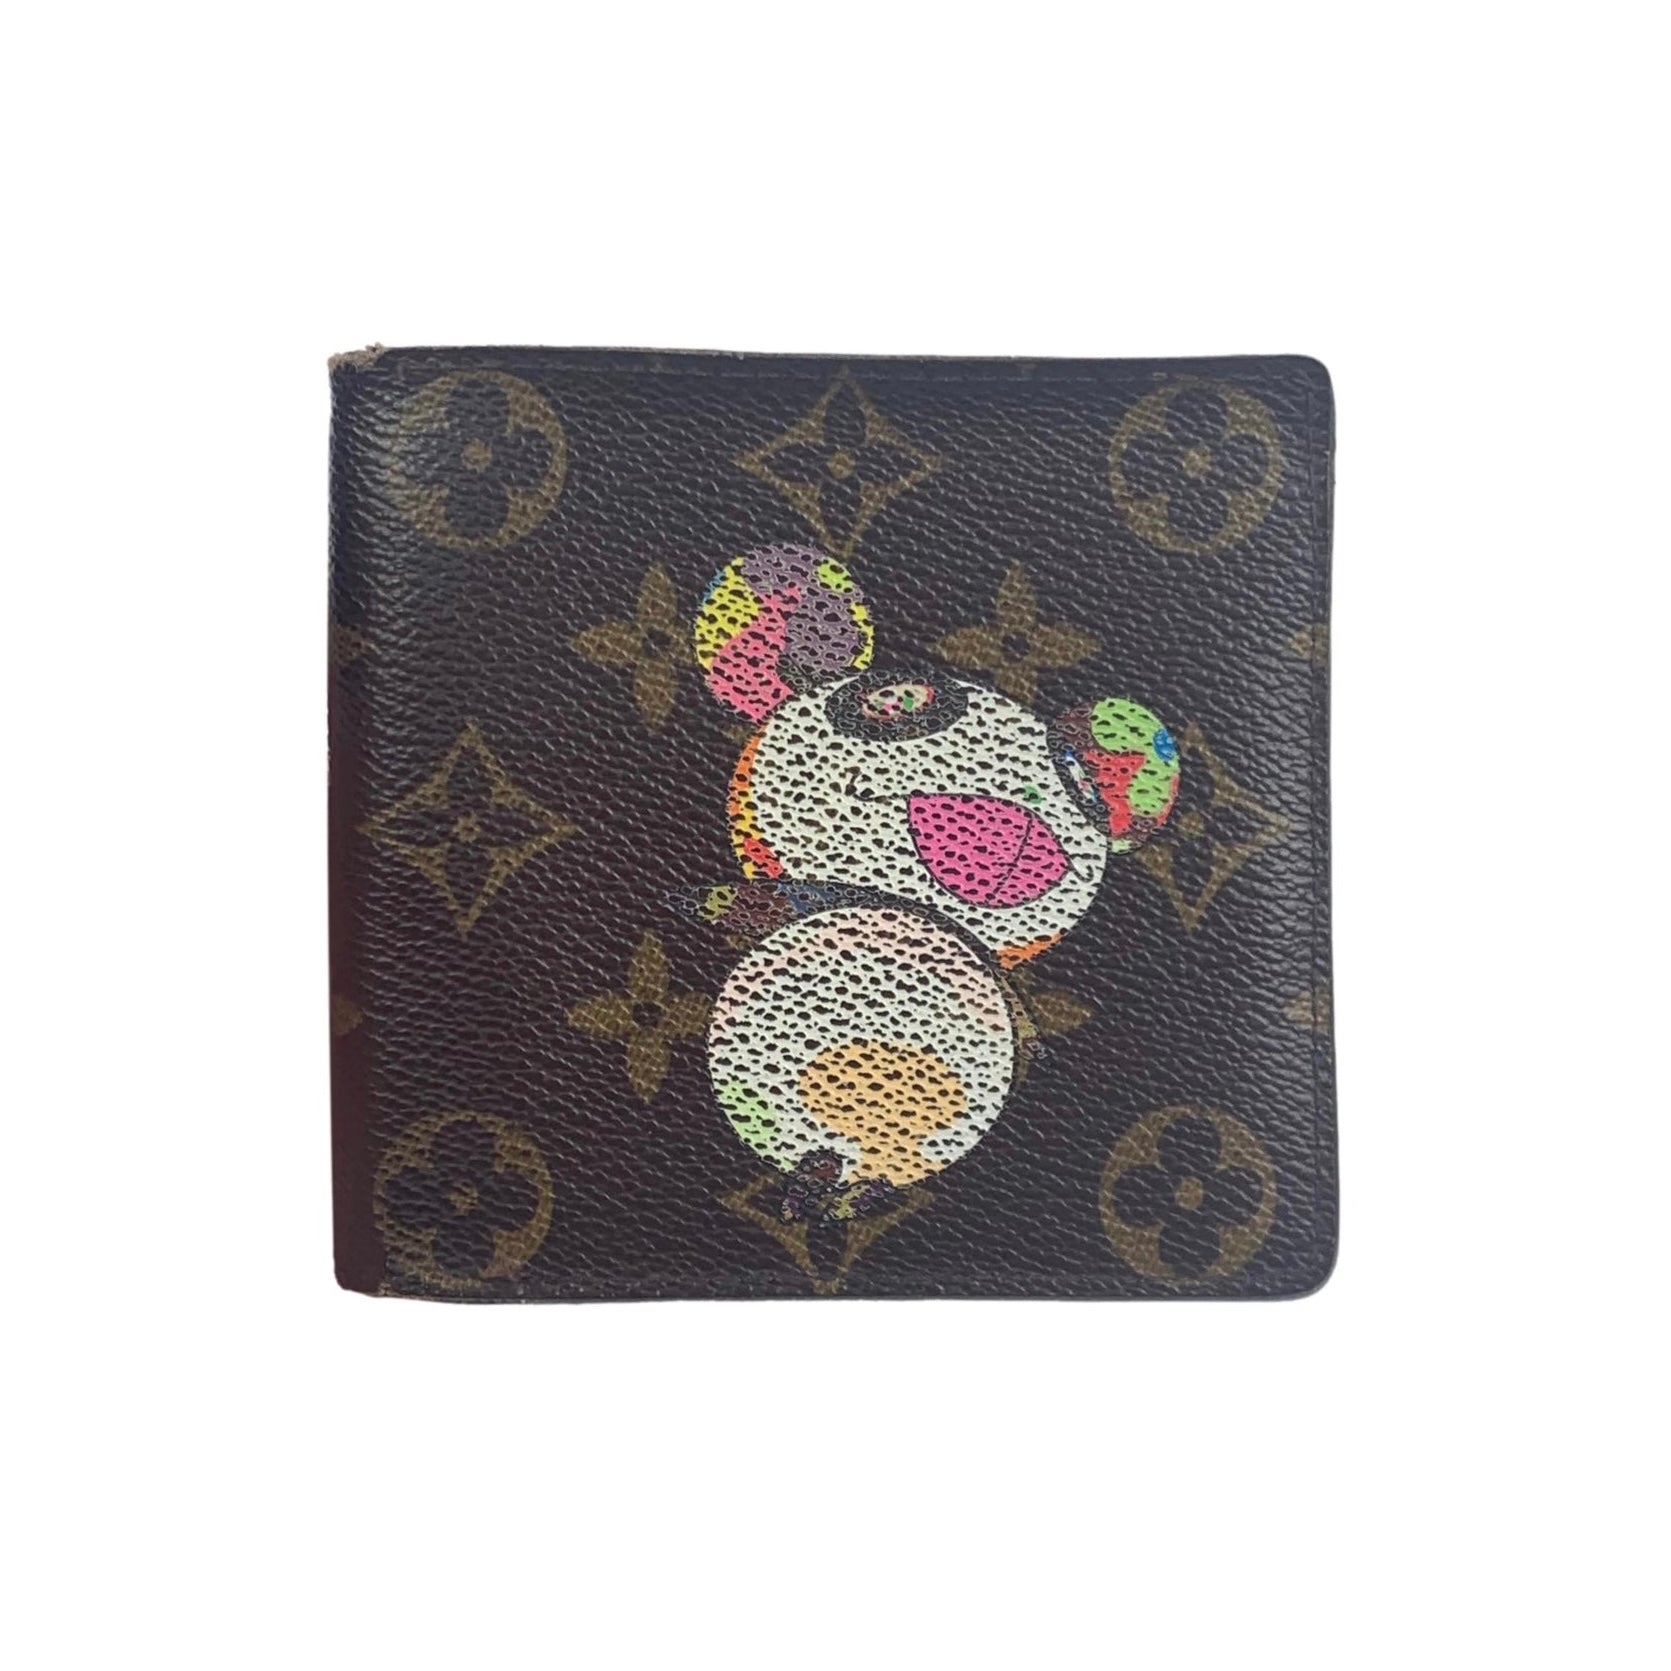 Buy Free Shipping [Used] LOUIS VUITTON Monogram Panda Porto Monet Zip Round  Zipper Long Wallet Takashi Murakami Collaboration M61729 from Japan - Buy  authentic Plus exclusive items from Japan